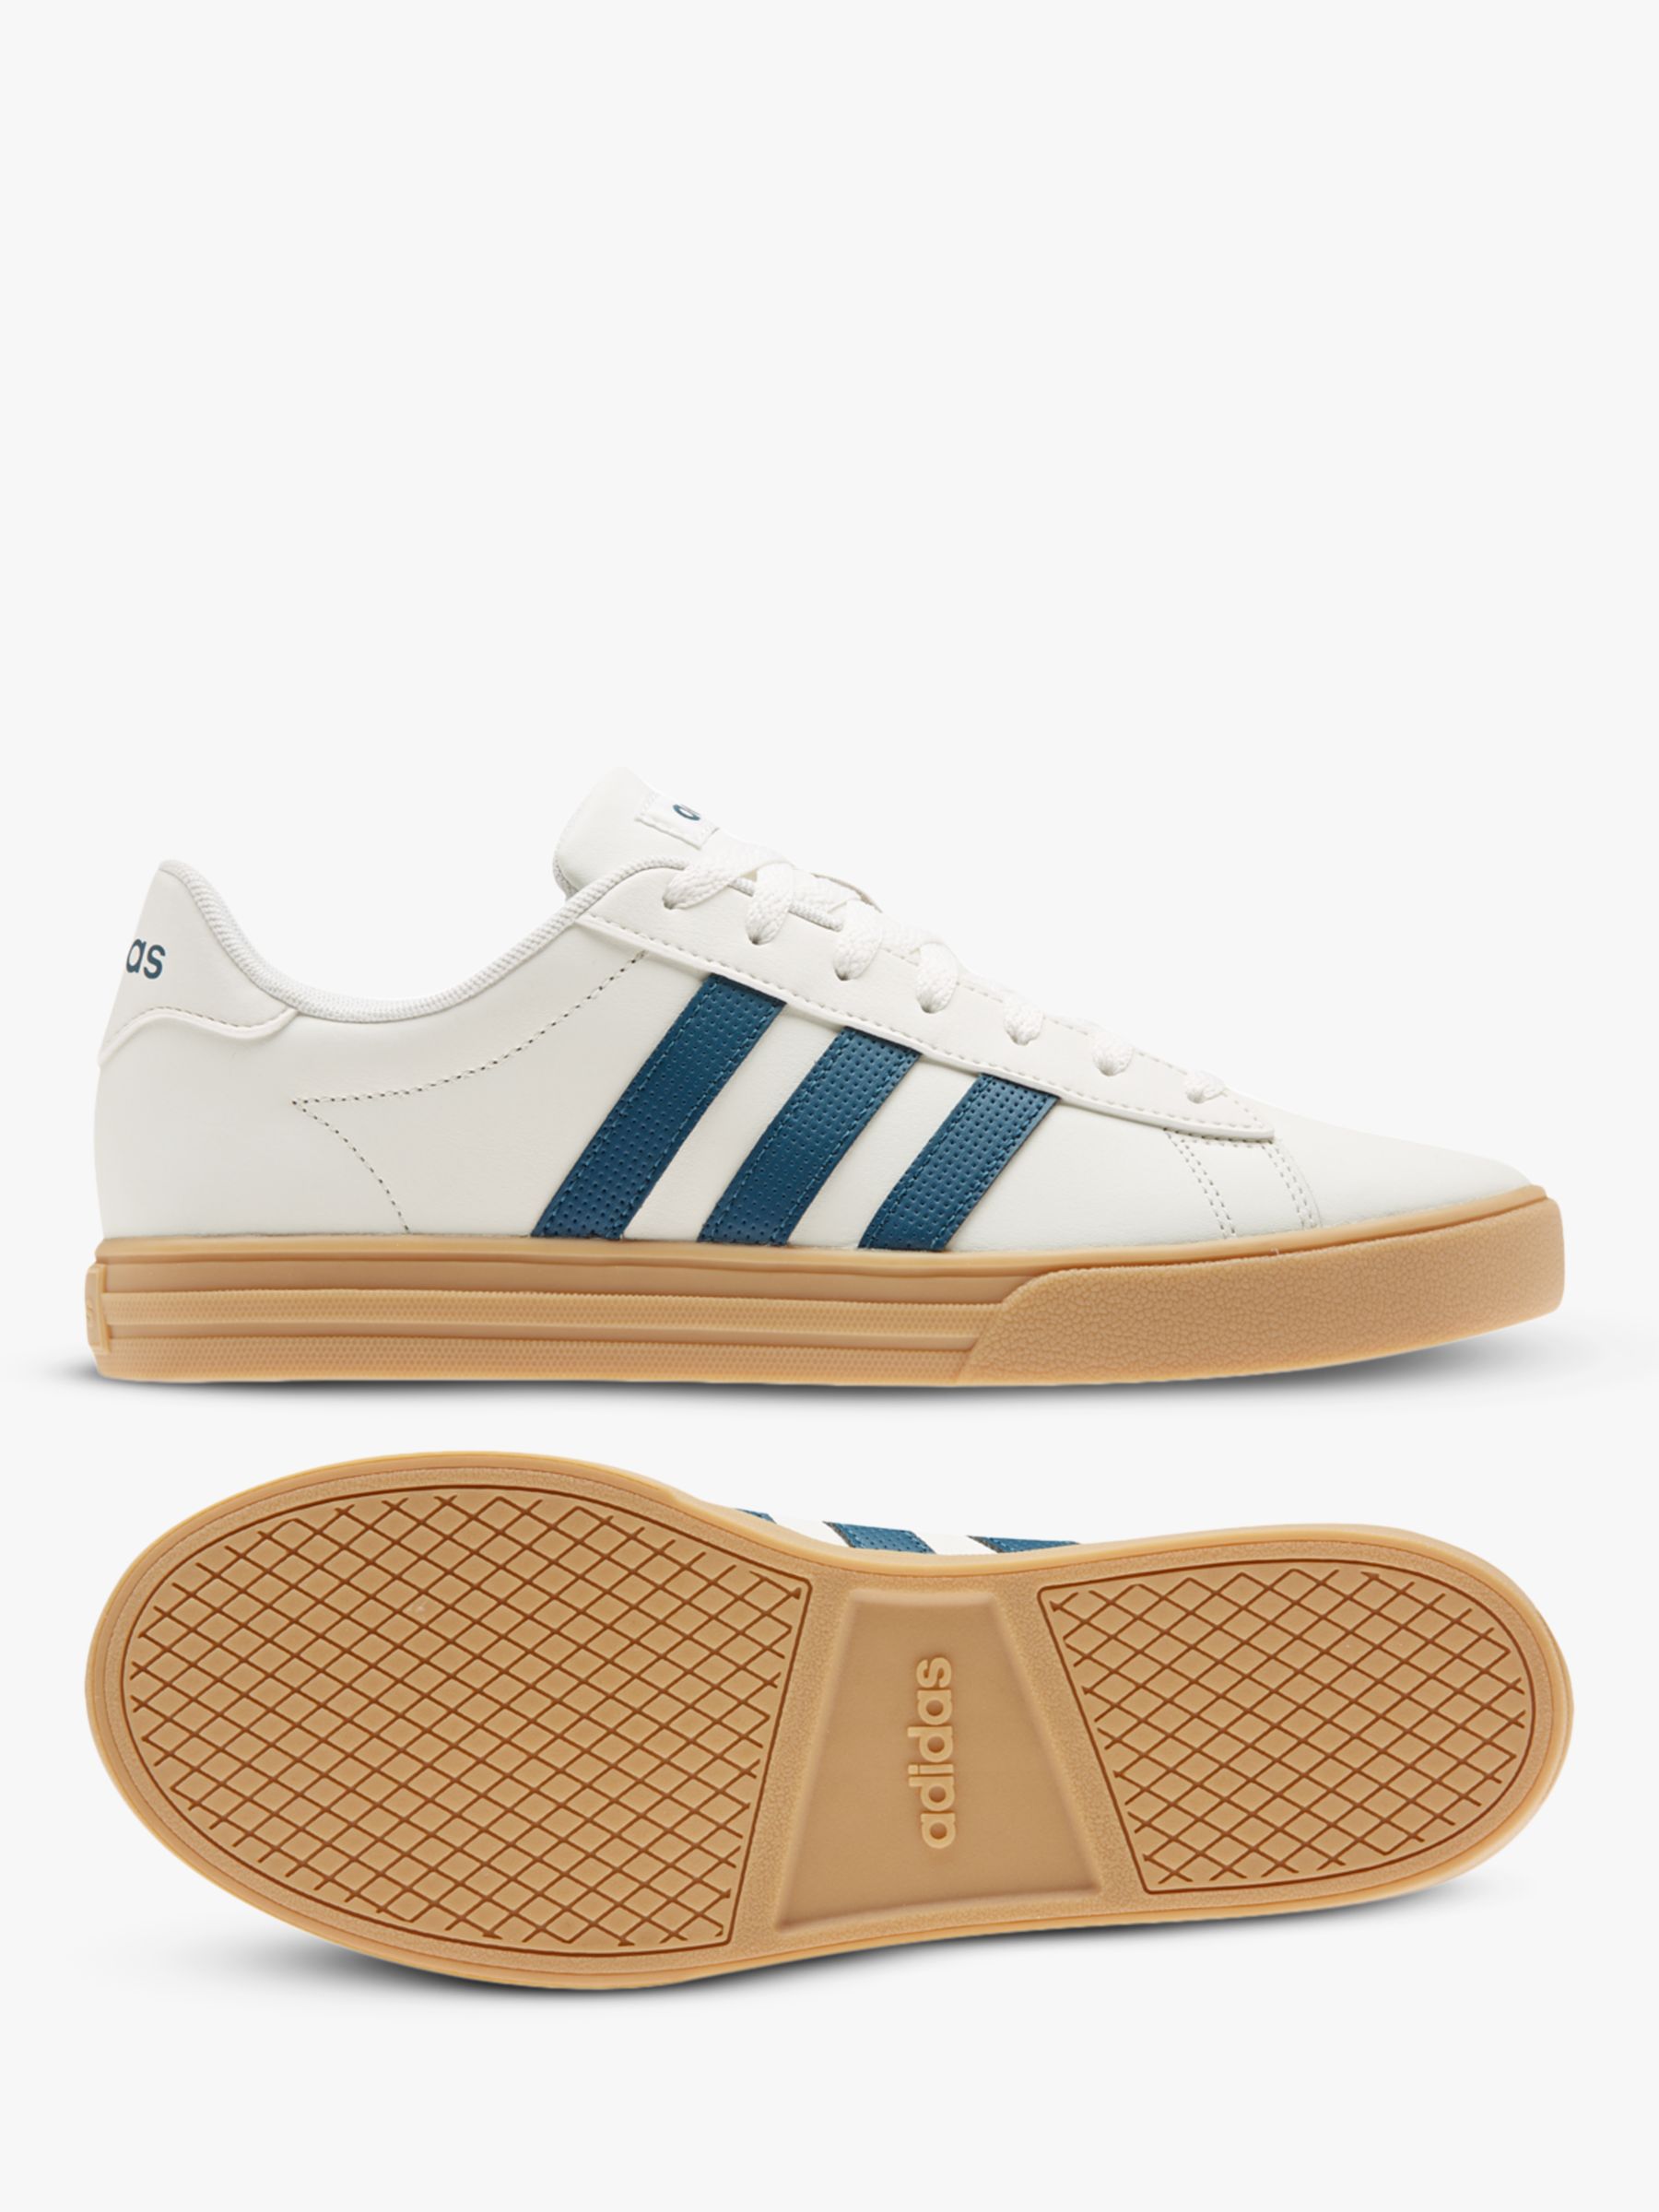 adidas Daily 2.0 Men's Trainers, Cloud White/Tech Mineral/Gum 3